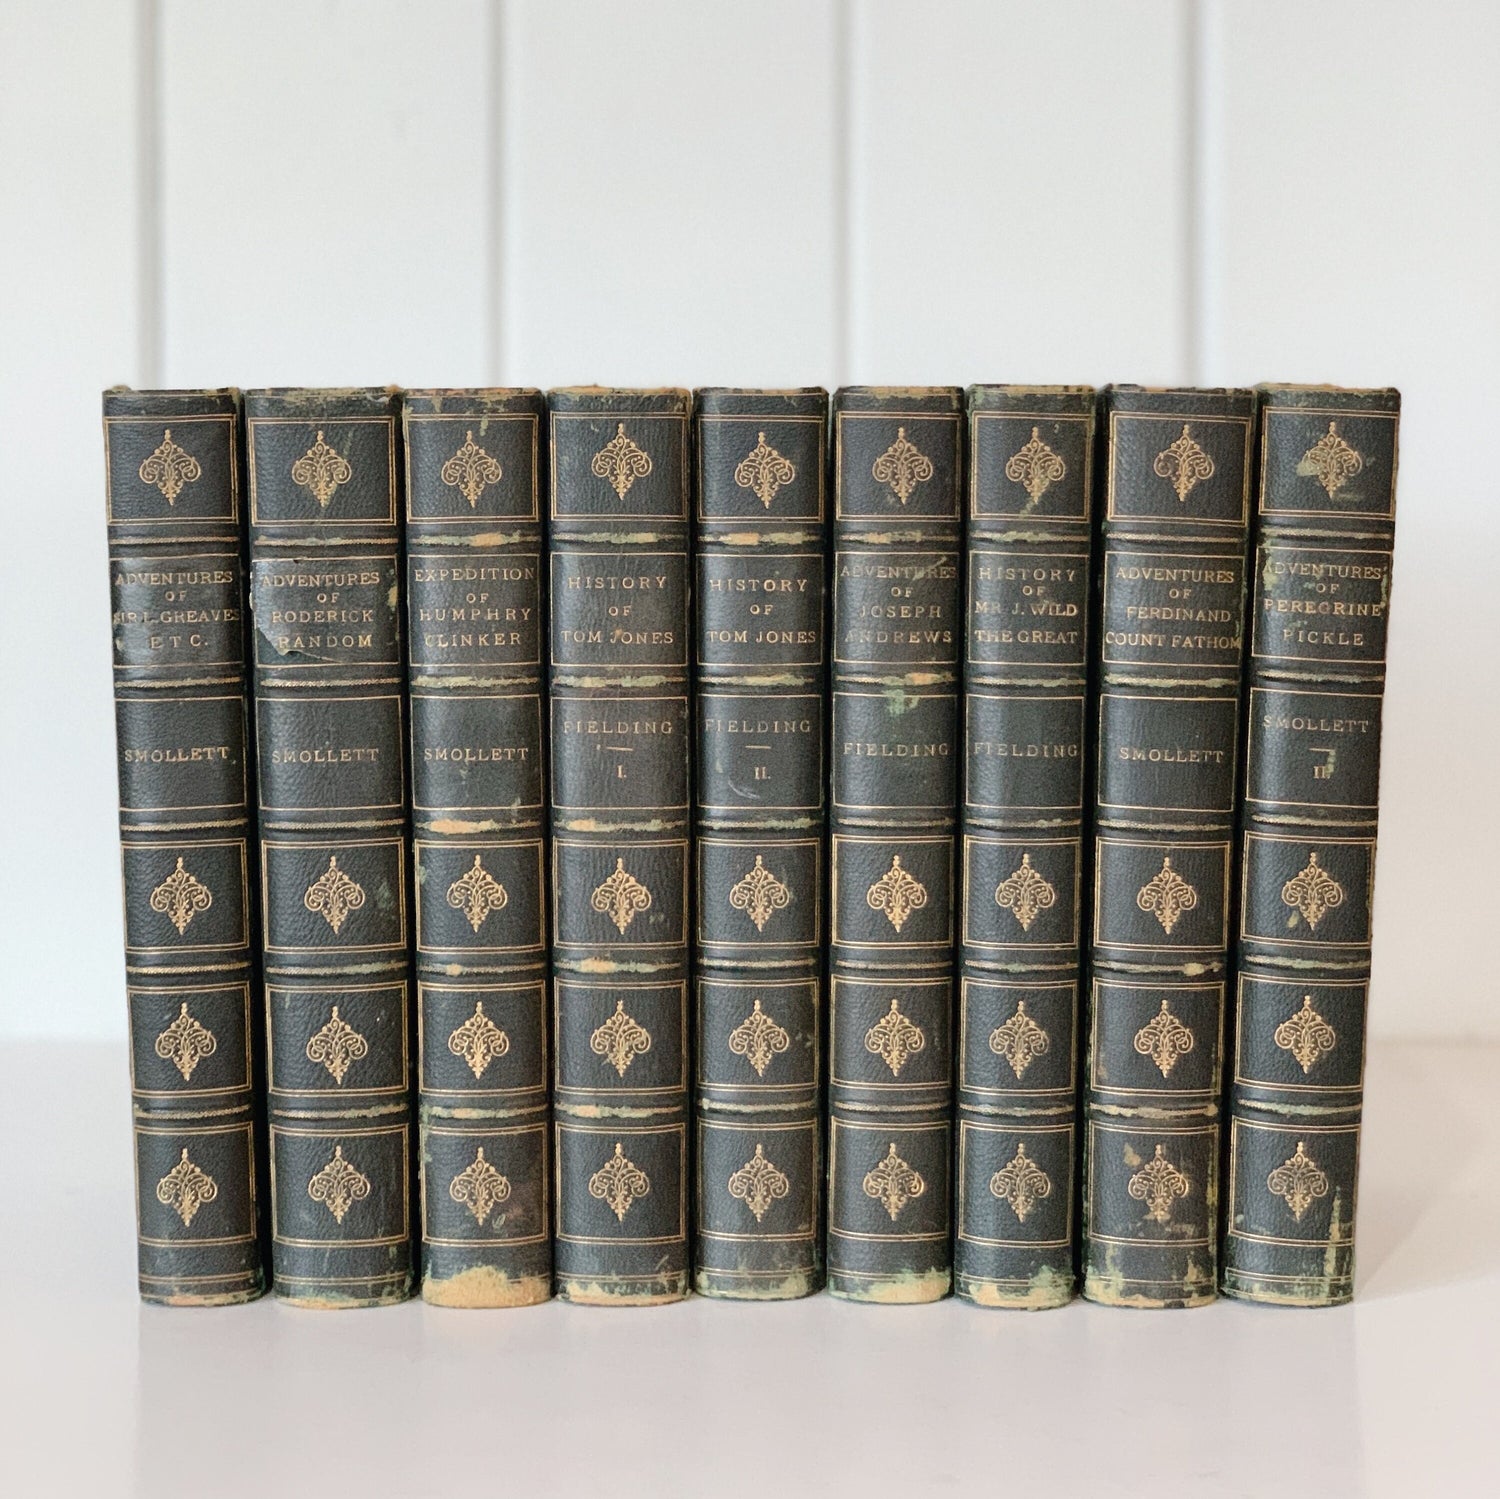 Tobias Smollett’s Novels, 1884, George Routledge and Sons